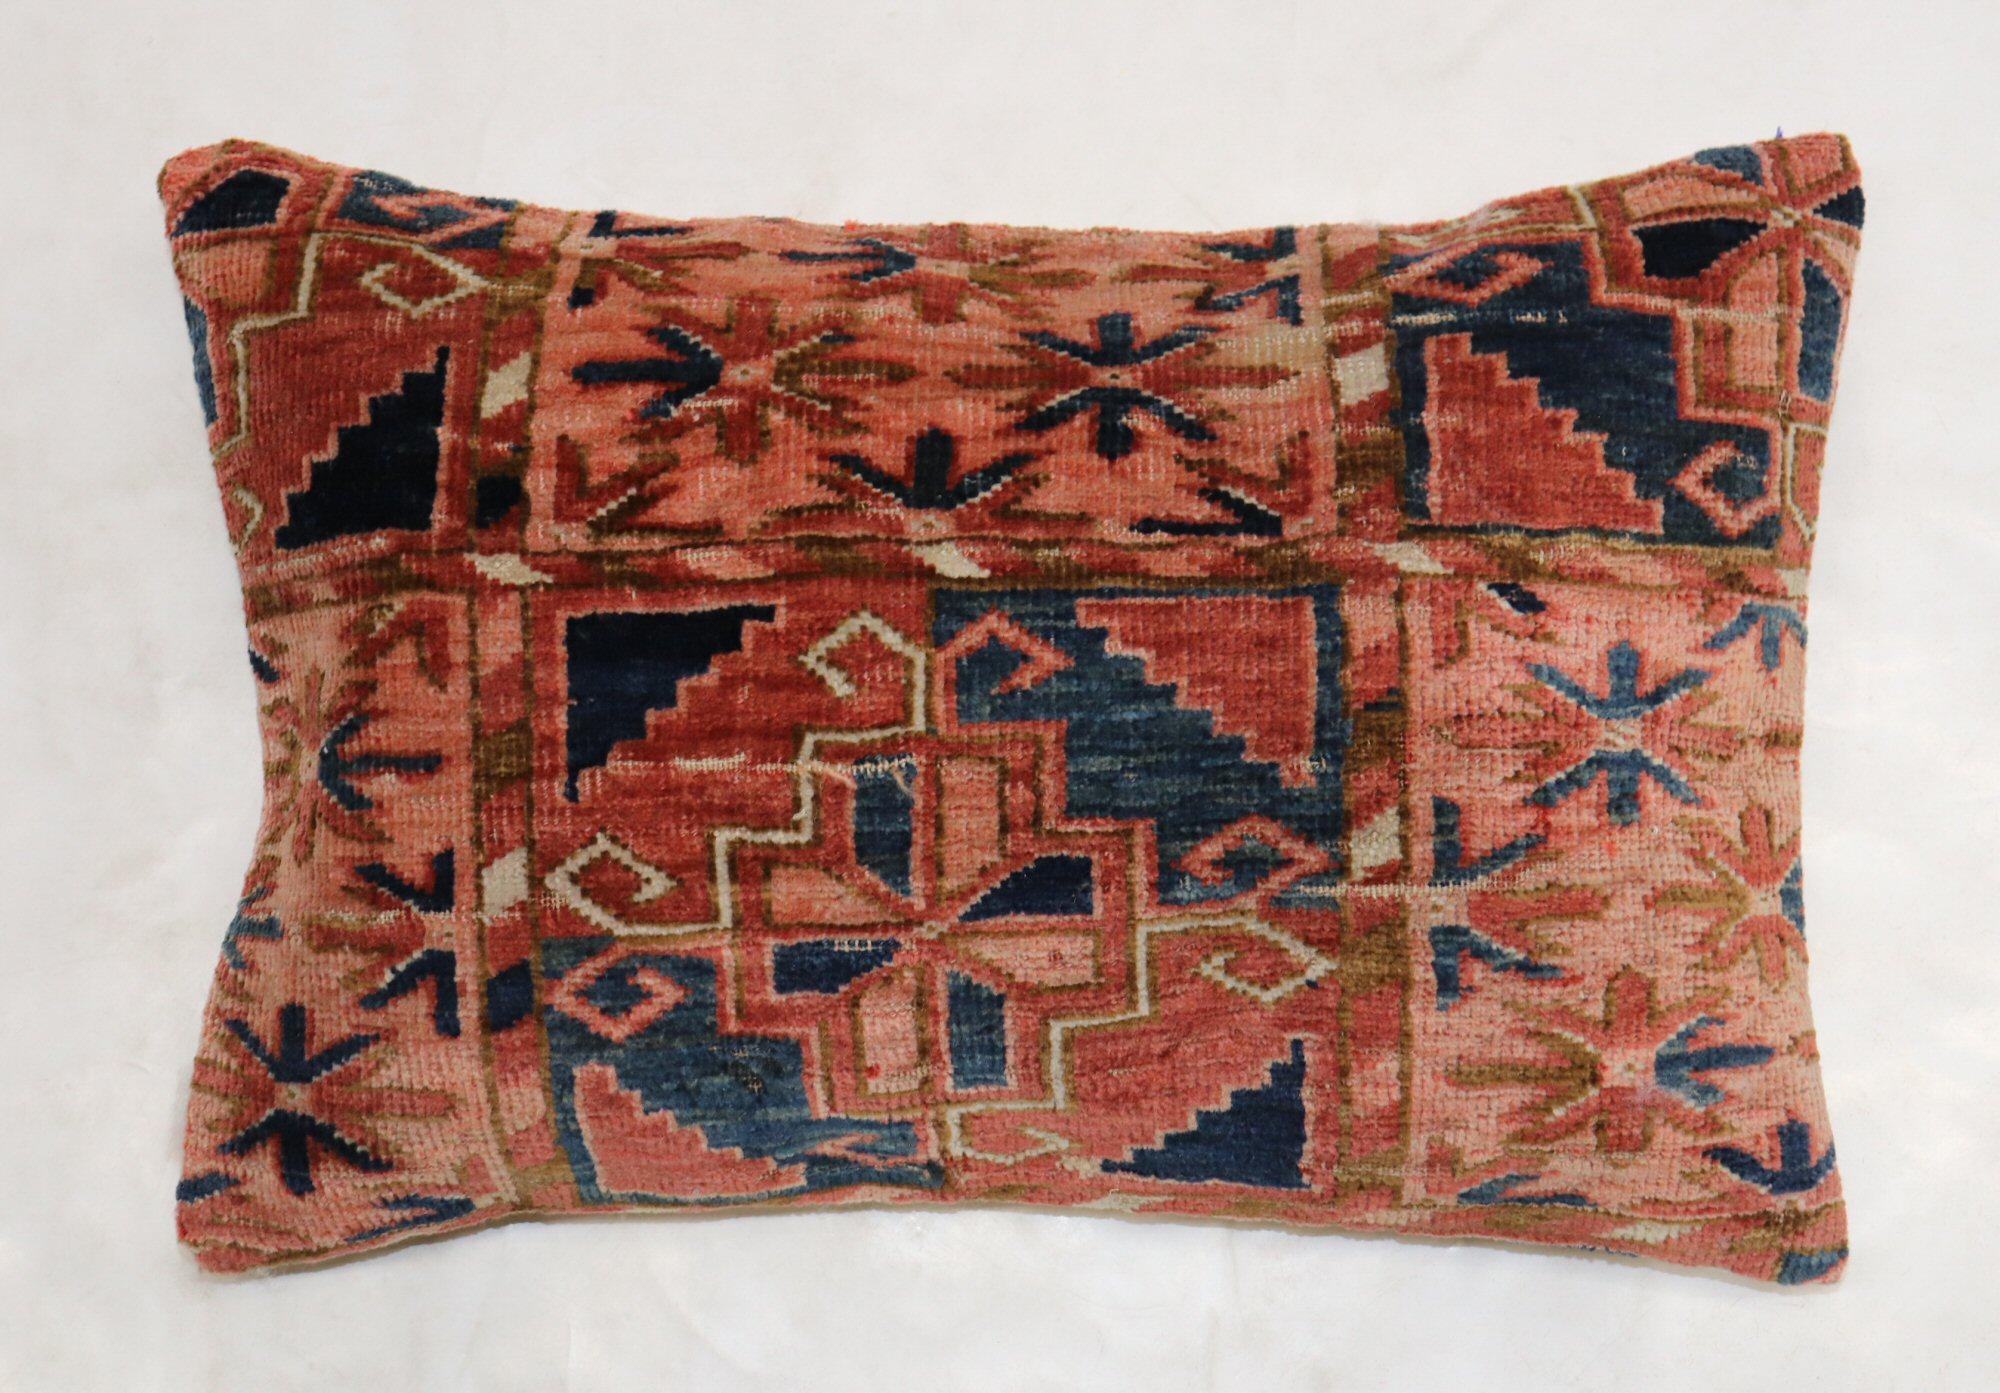 Pillow made from a 19th-century Turkeman rug in a lumbar size.

Measures: 16